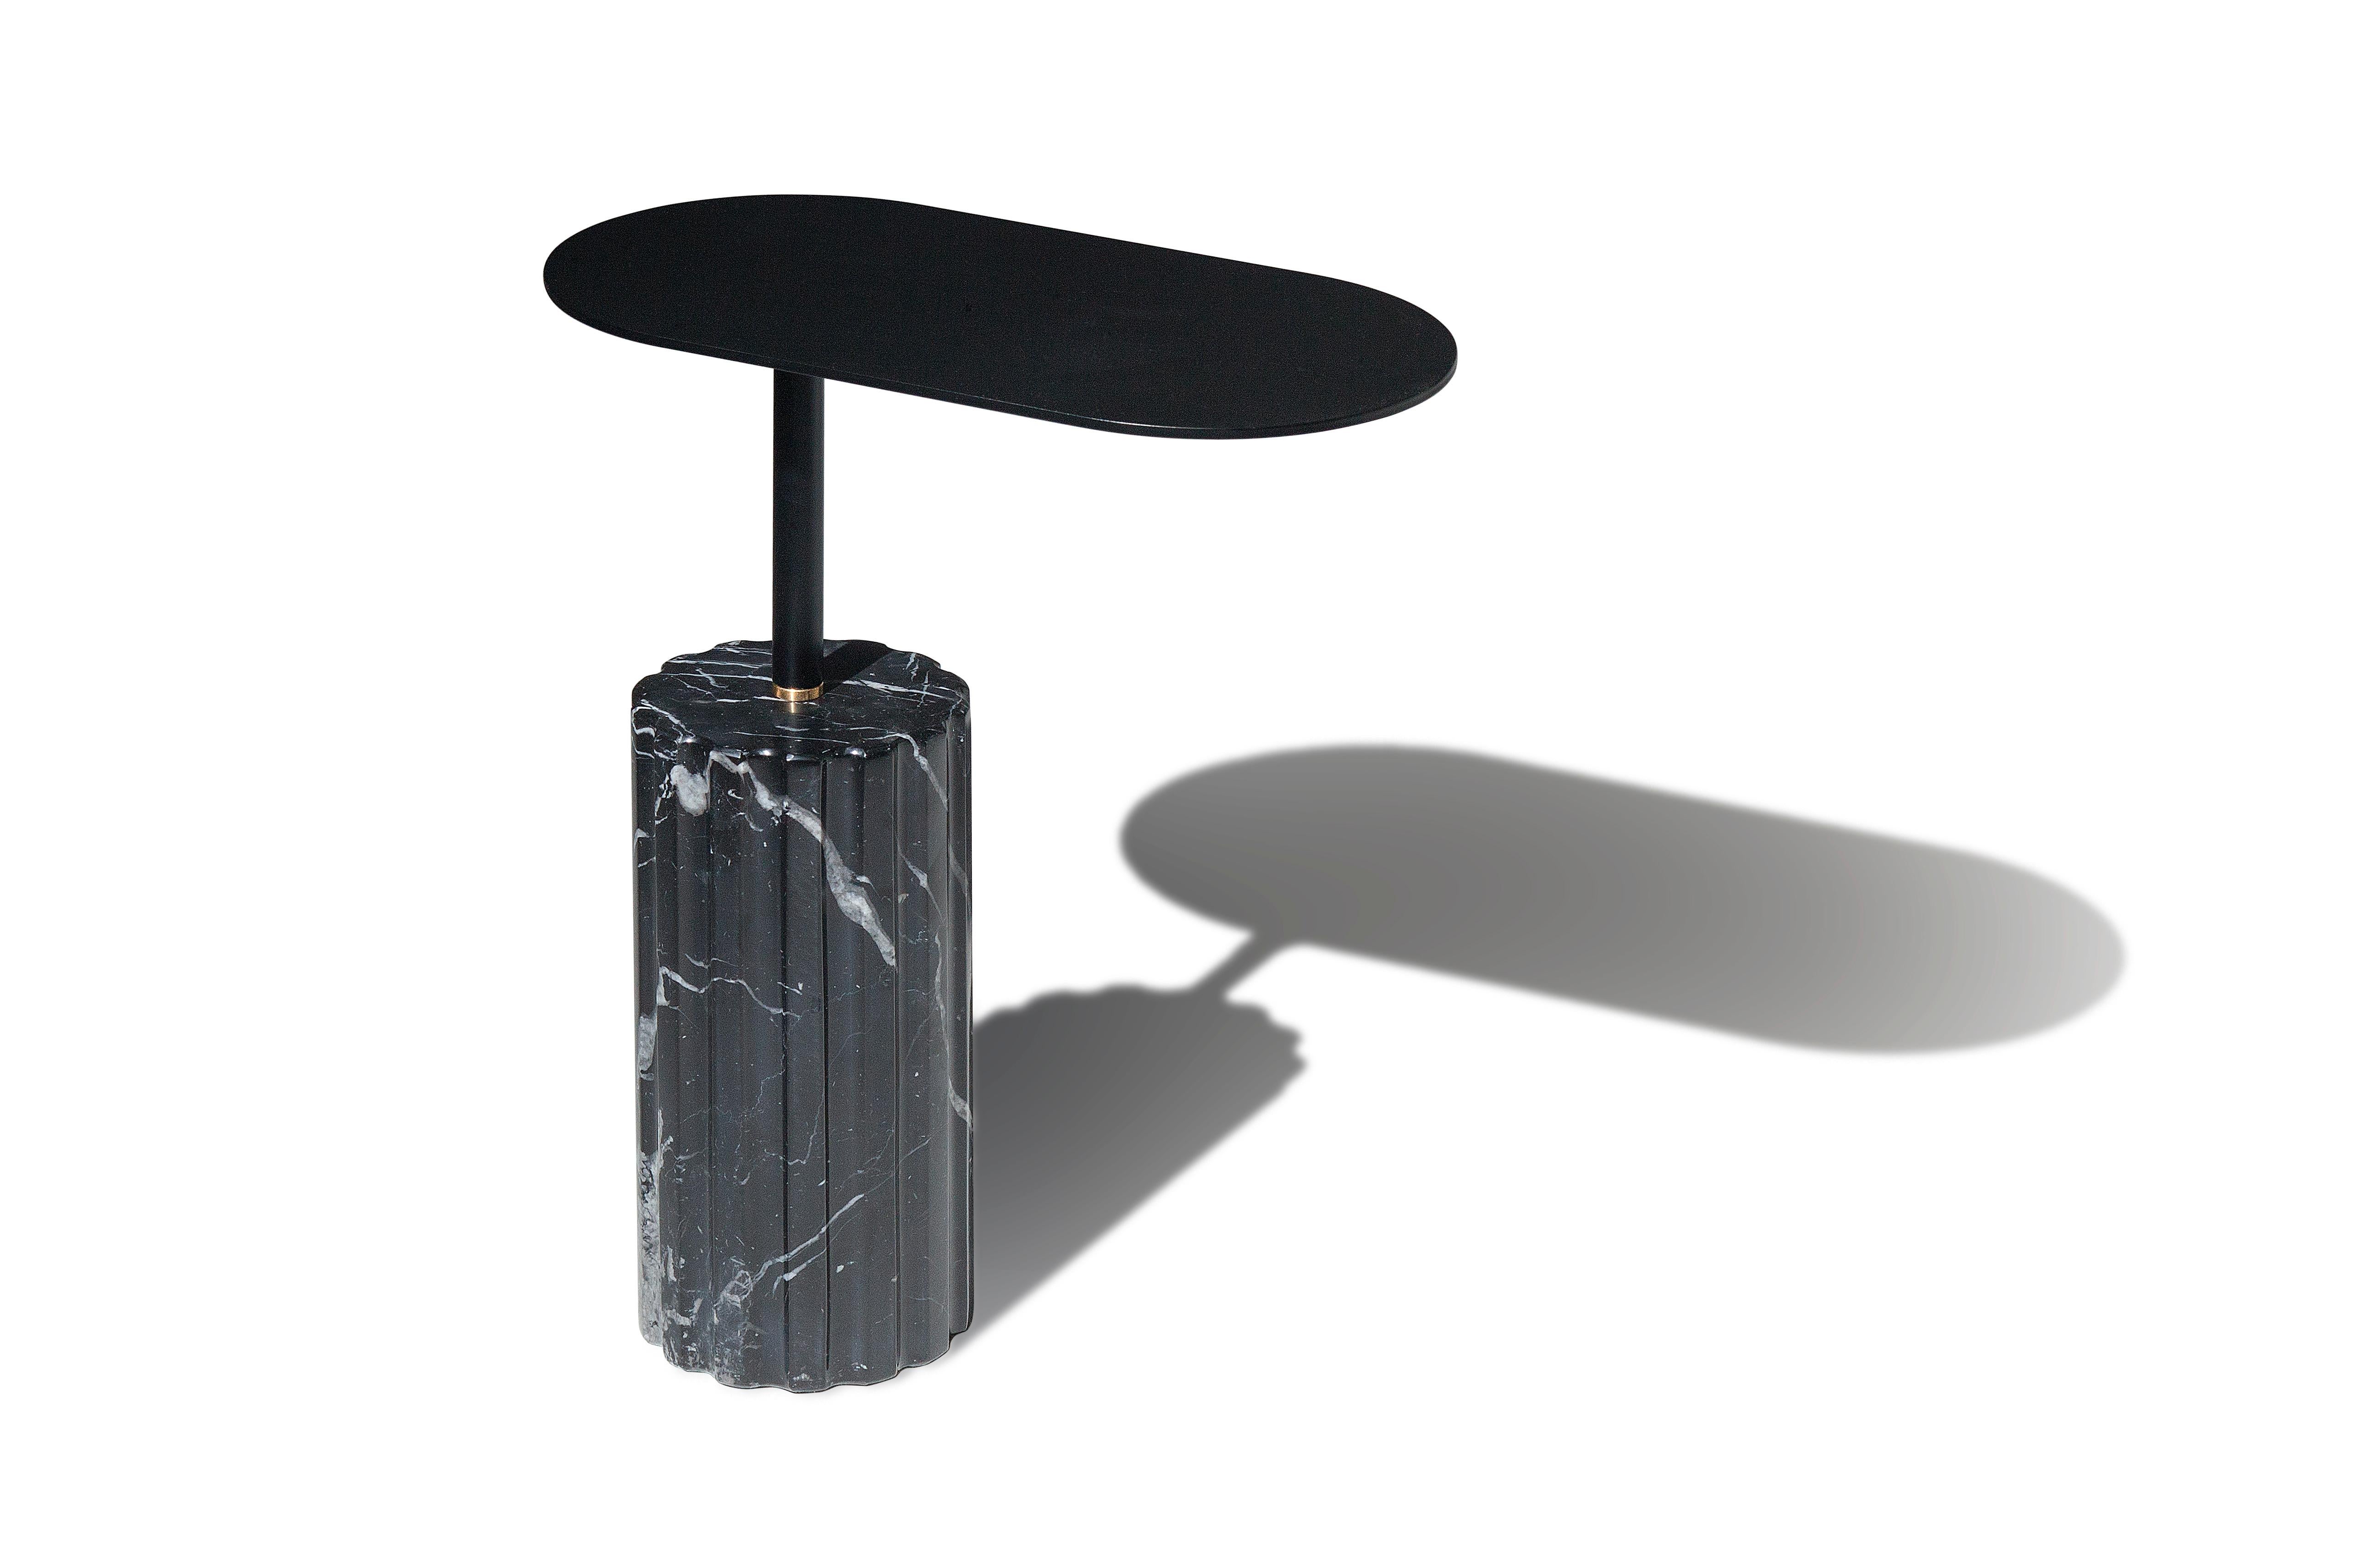 Column side table by Joseph Vila Capdevila

Material: marble
Dimensions: 40 x 22 x 46 cm
Weight: 15.5kg

Low table made of lacquered metal oval envelope that is supported by a bar of the same material with a solid brass detail on a fluted